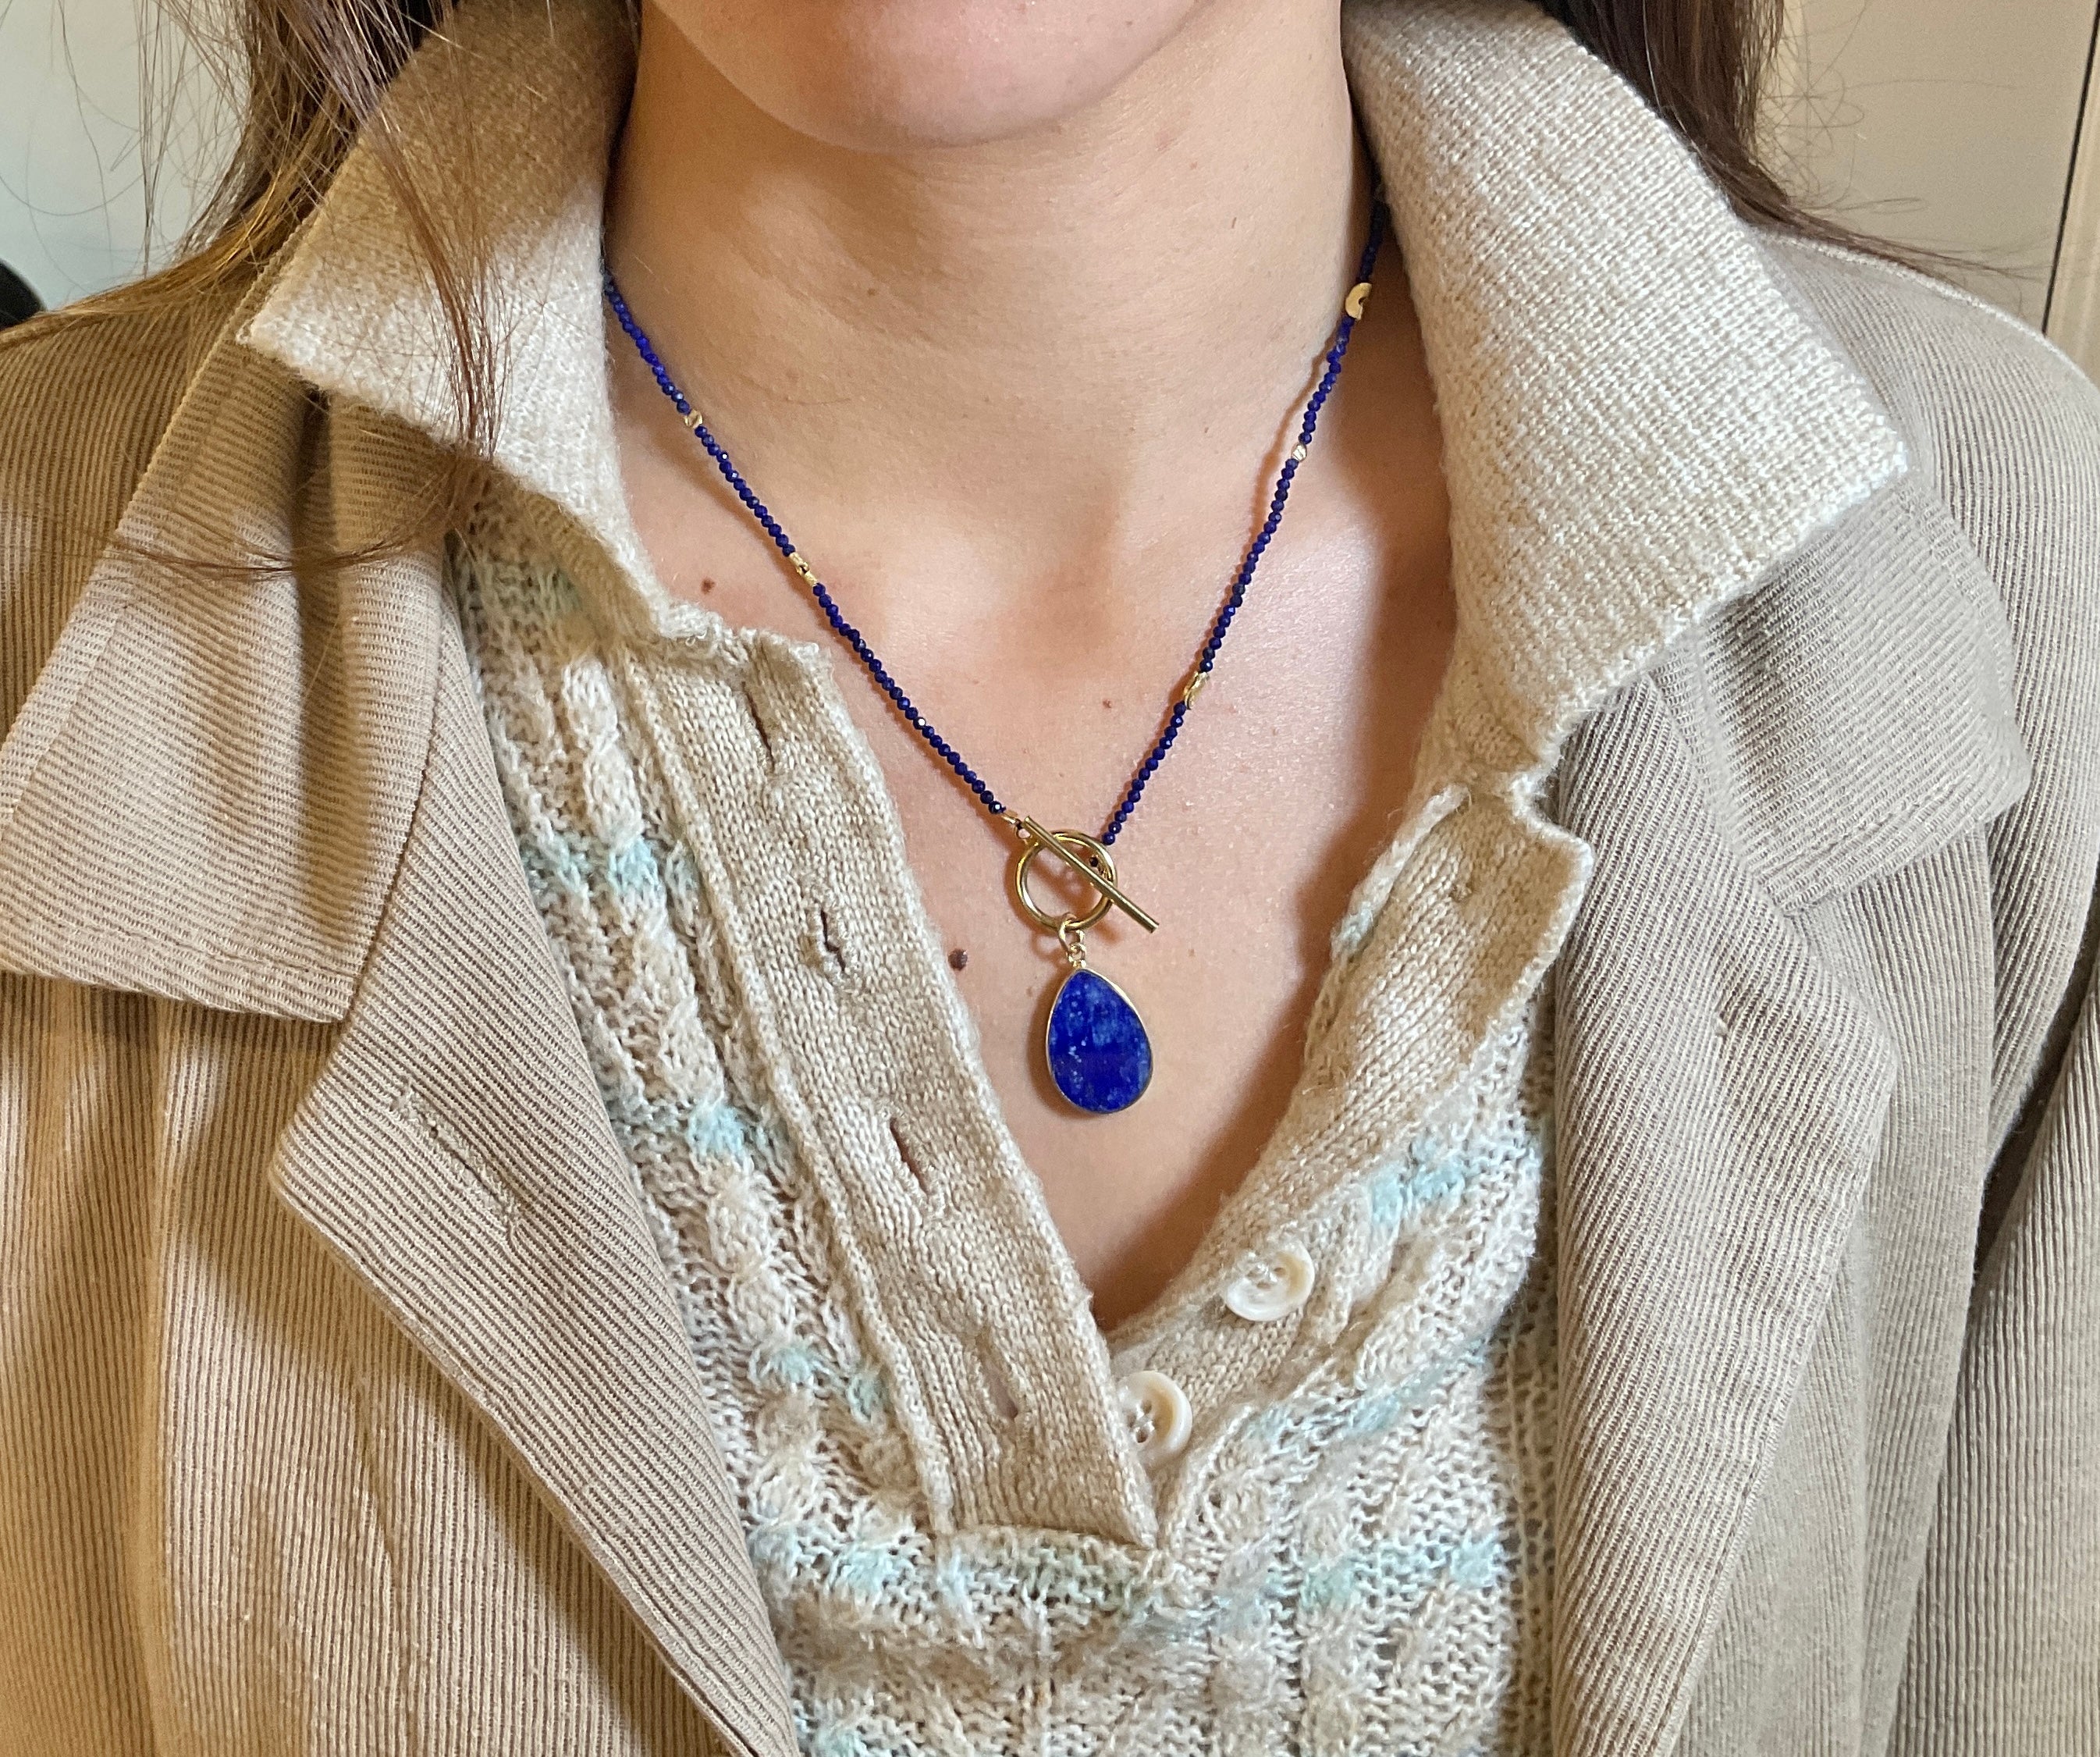 Lapis and Sapphire Half Moon Necklace with Toggle